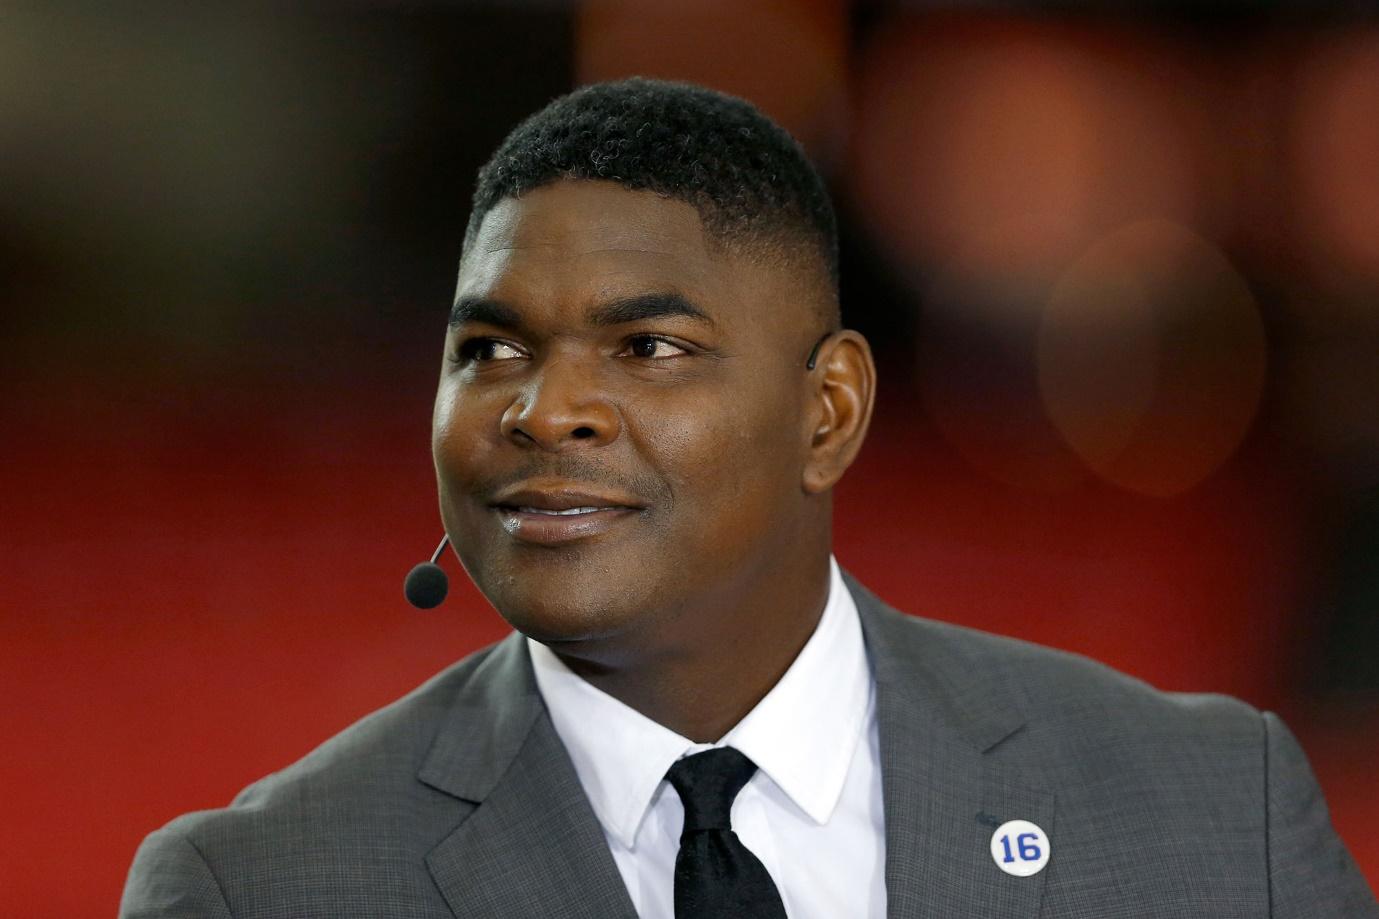 Keyshawn Johnson wiki, stats, net worth, height, weight, contract trades, and draft. ESPN's Keyshawn Johnson-led show ready to prove critics wrong